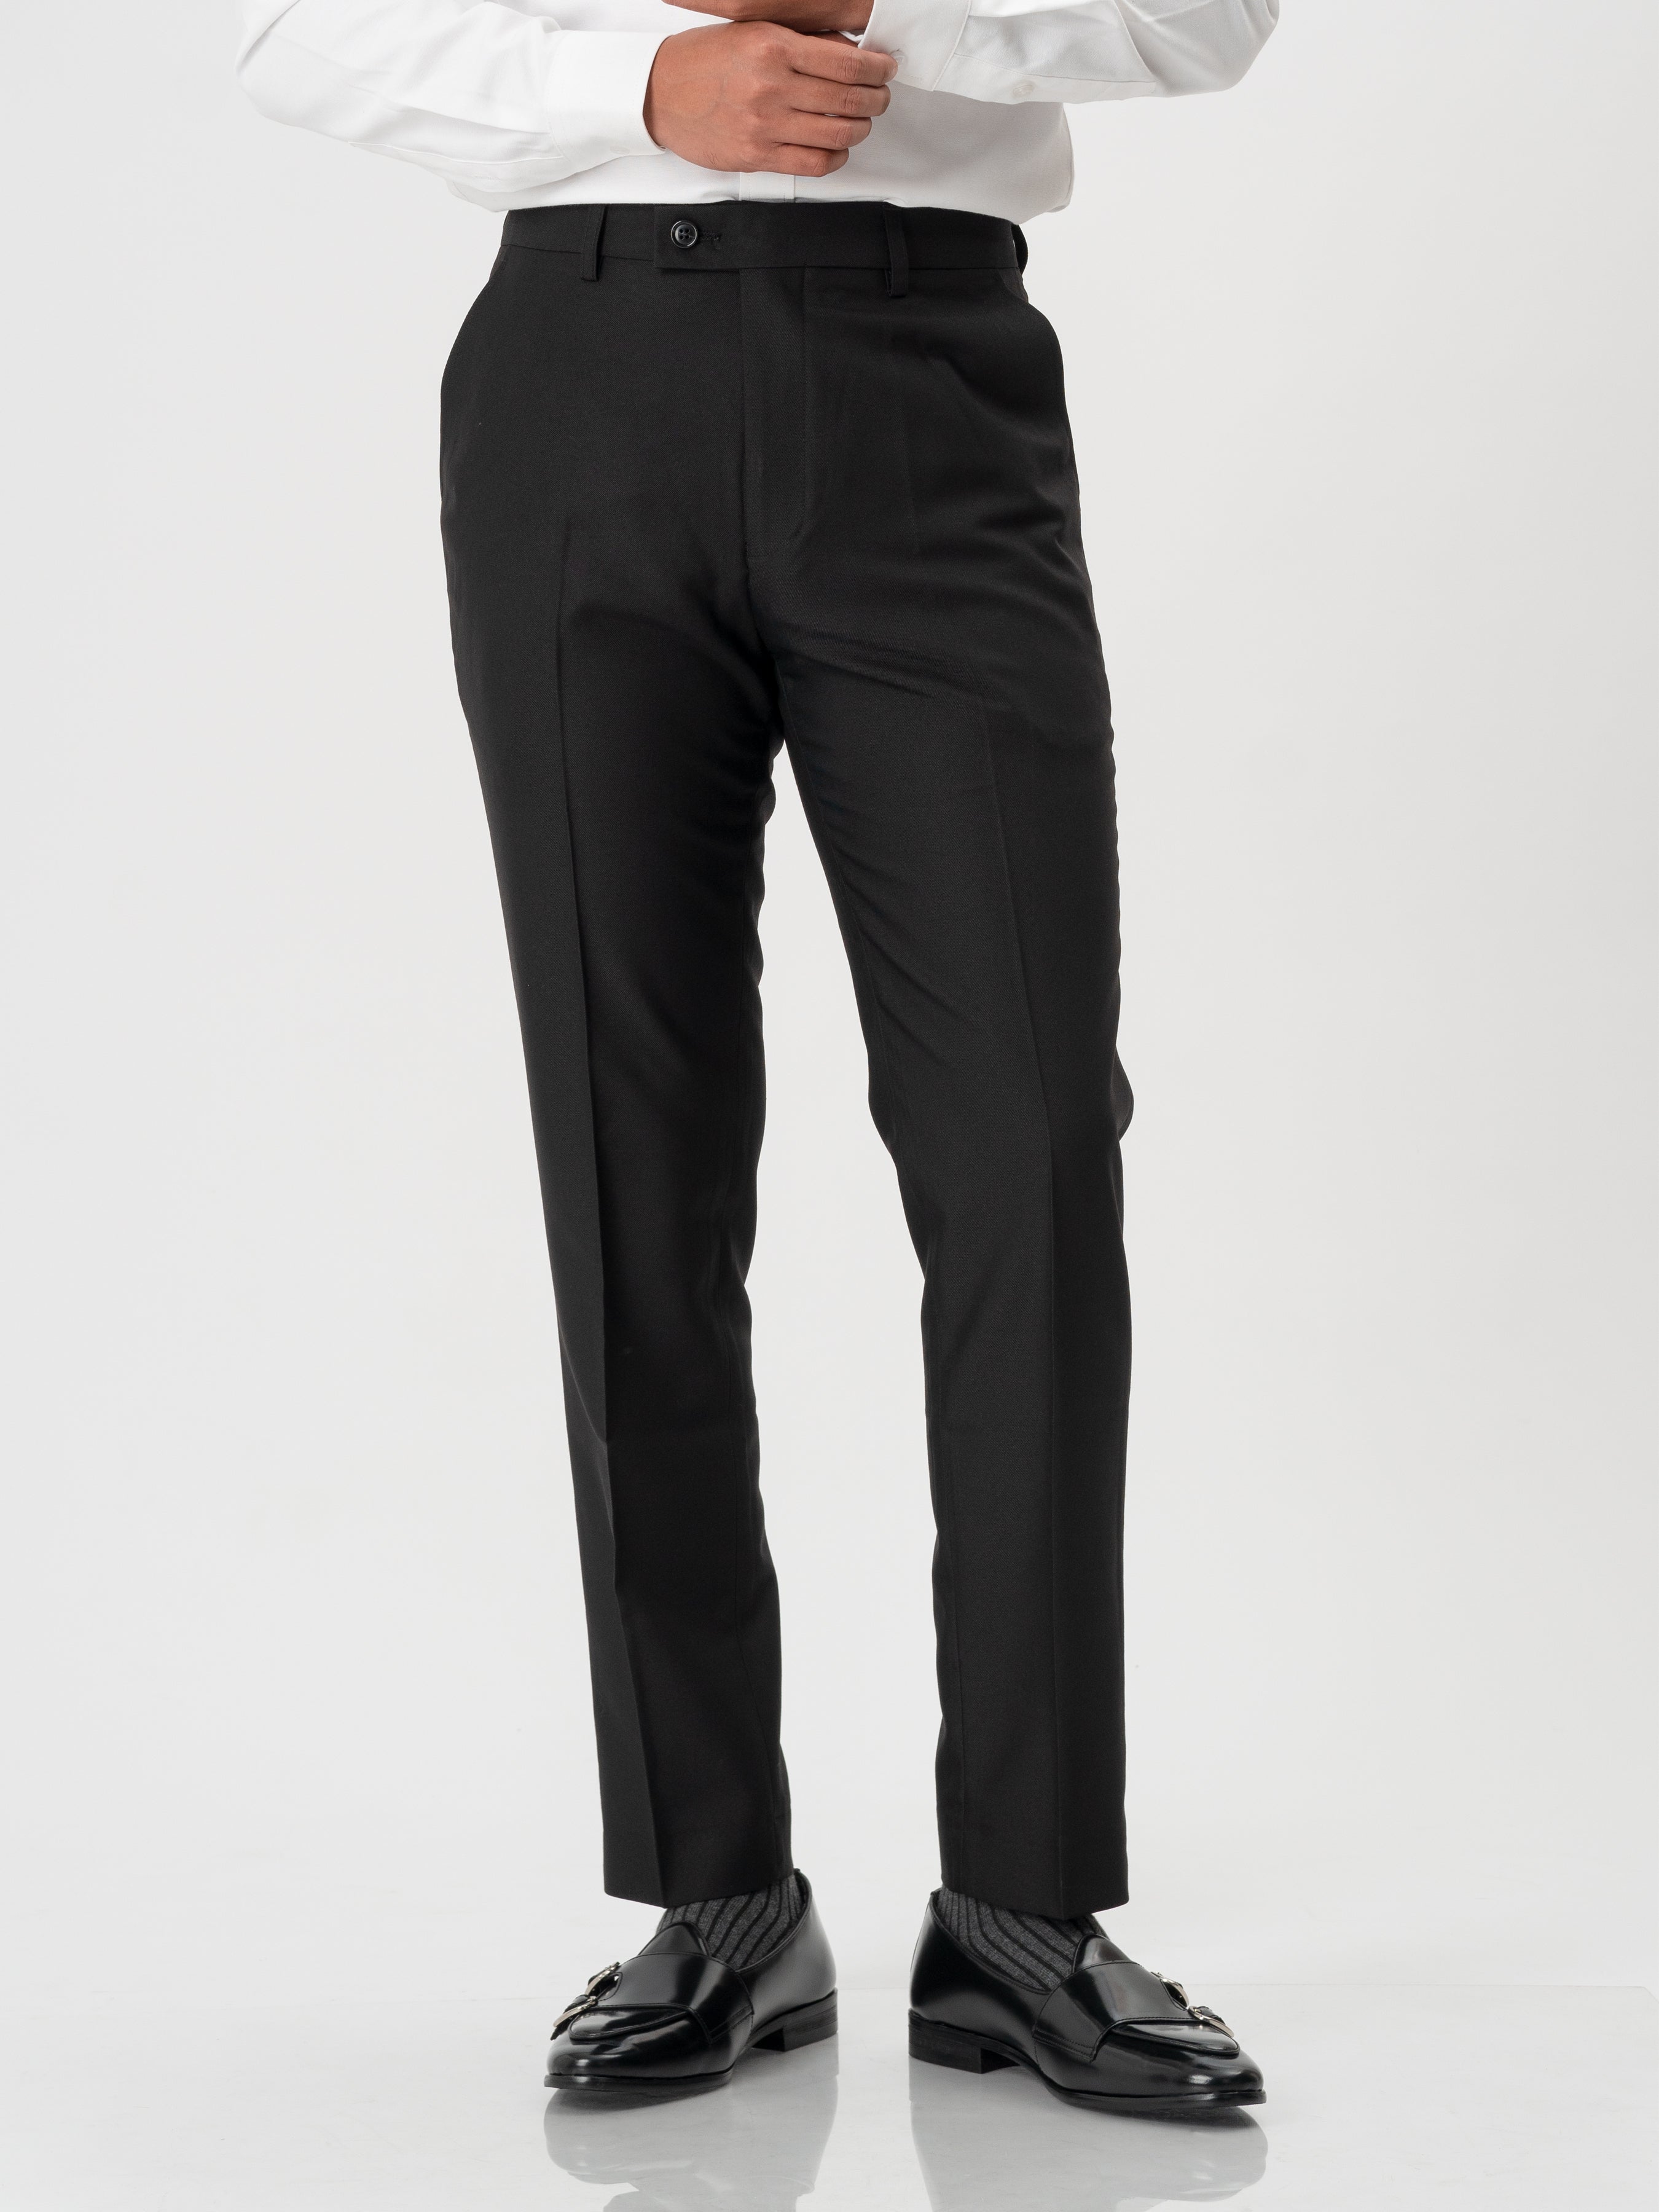 Trousers With Belt Loop - Tuxedo Black Plain (Stretchable)